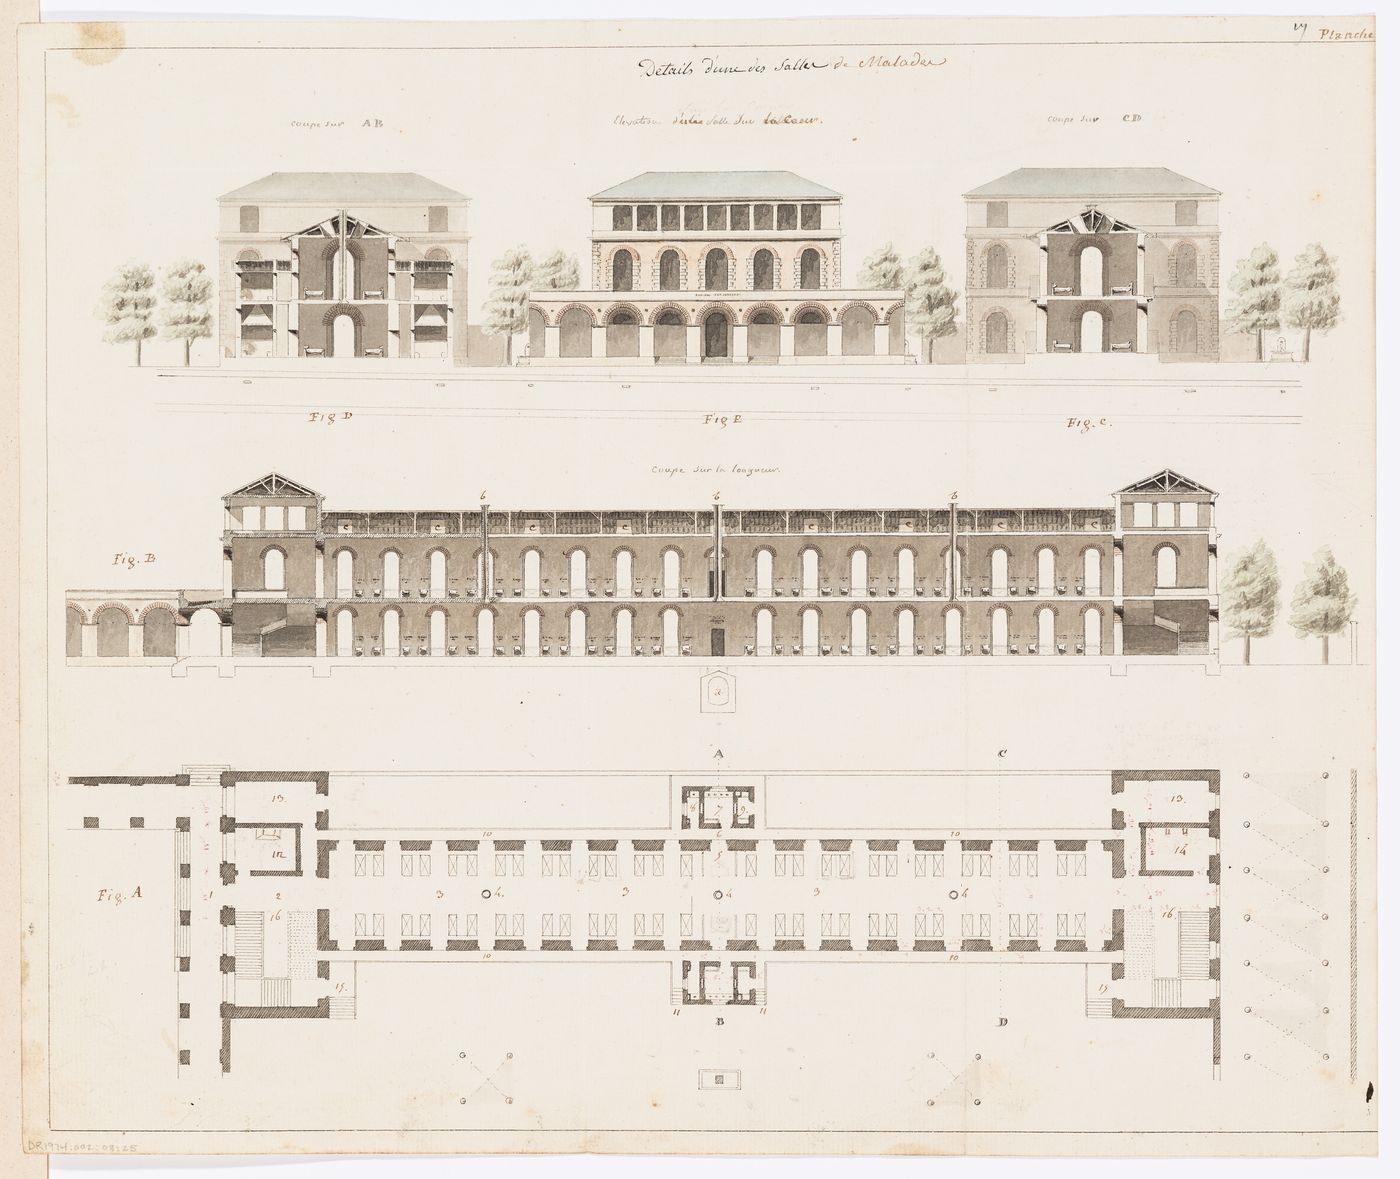 Ideal hospital for 1000 to 1200 patients, Paris: Sections, elevation, and plan